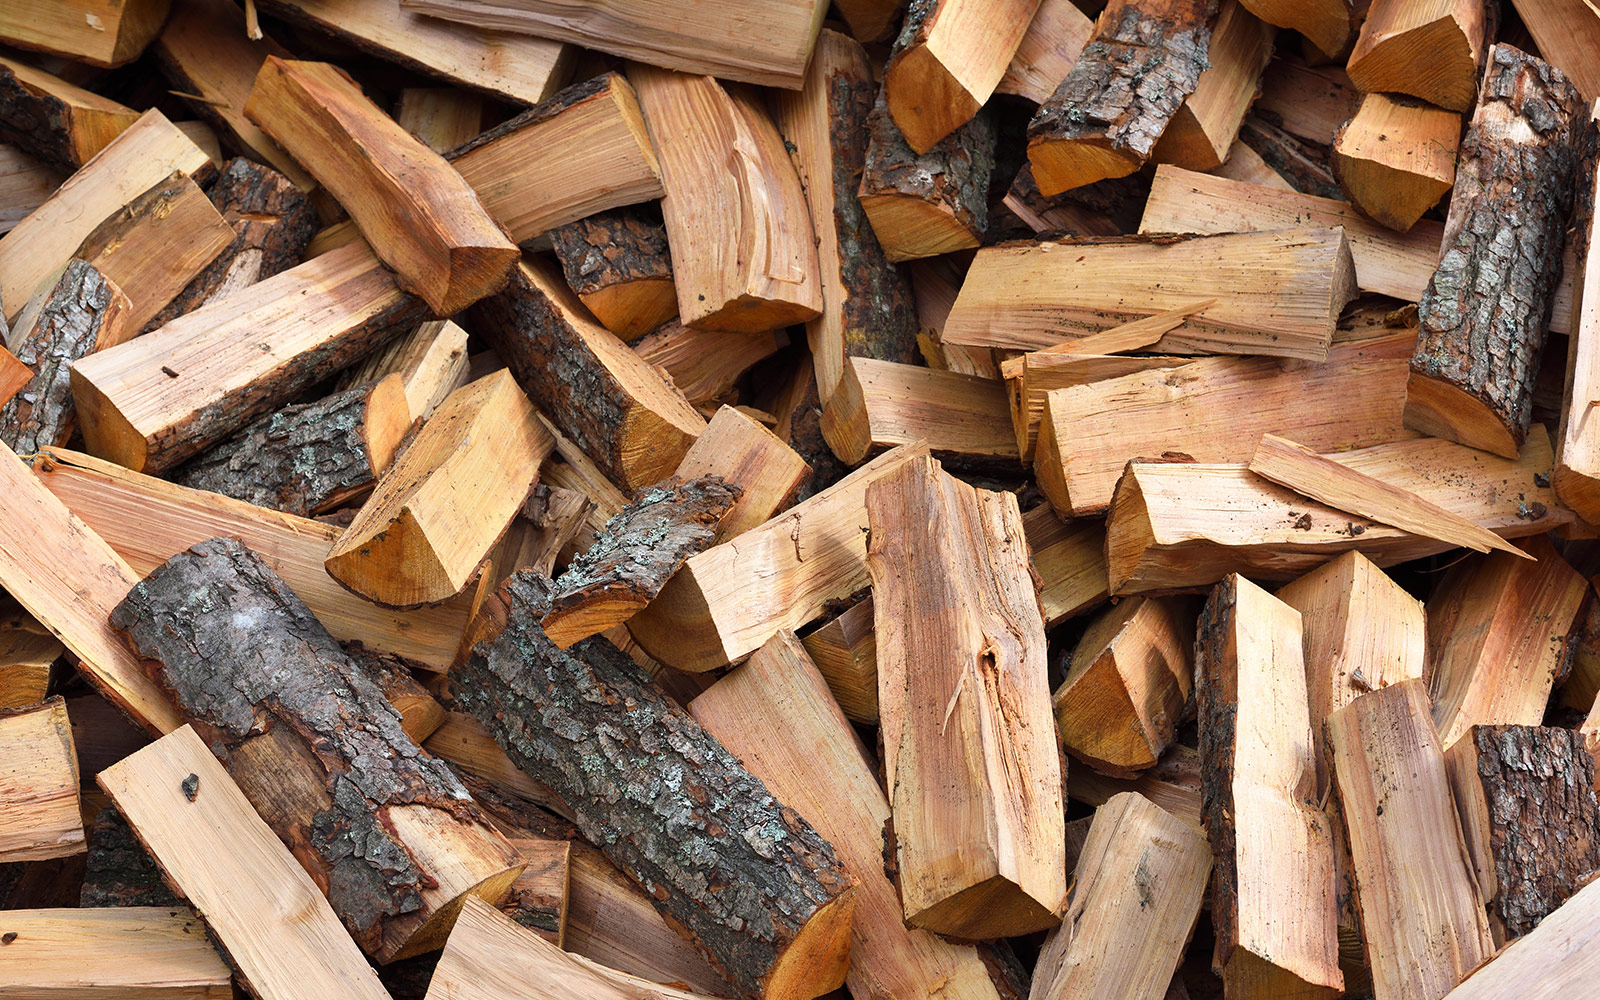 Free Personal Use Firewood Gathering Continues In 2020 With Permits Montana Hunting And Fishing Information